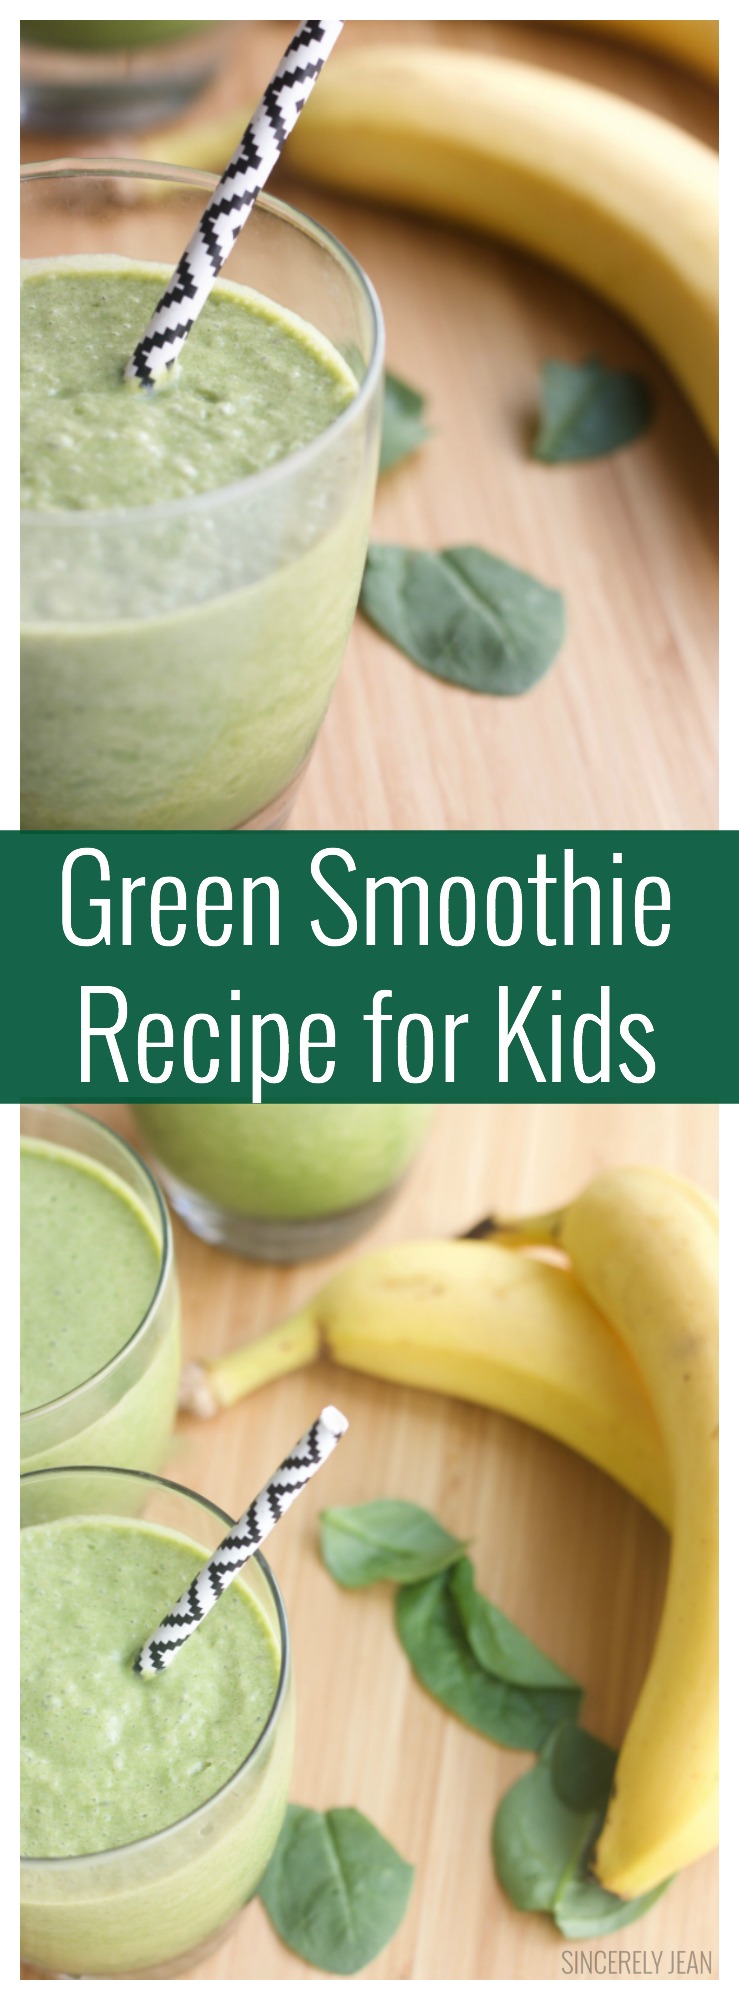 Green Smoothie Recipe for Kids recipe health for kids breakfast energy greens easy spinach